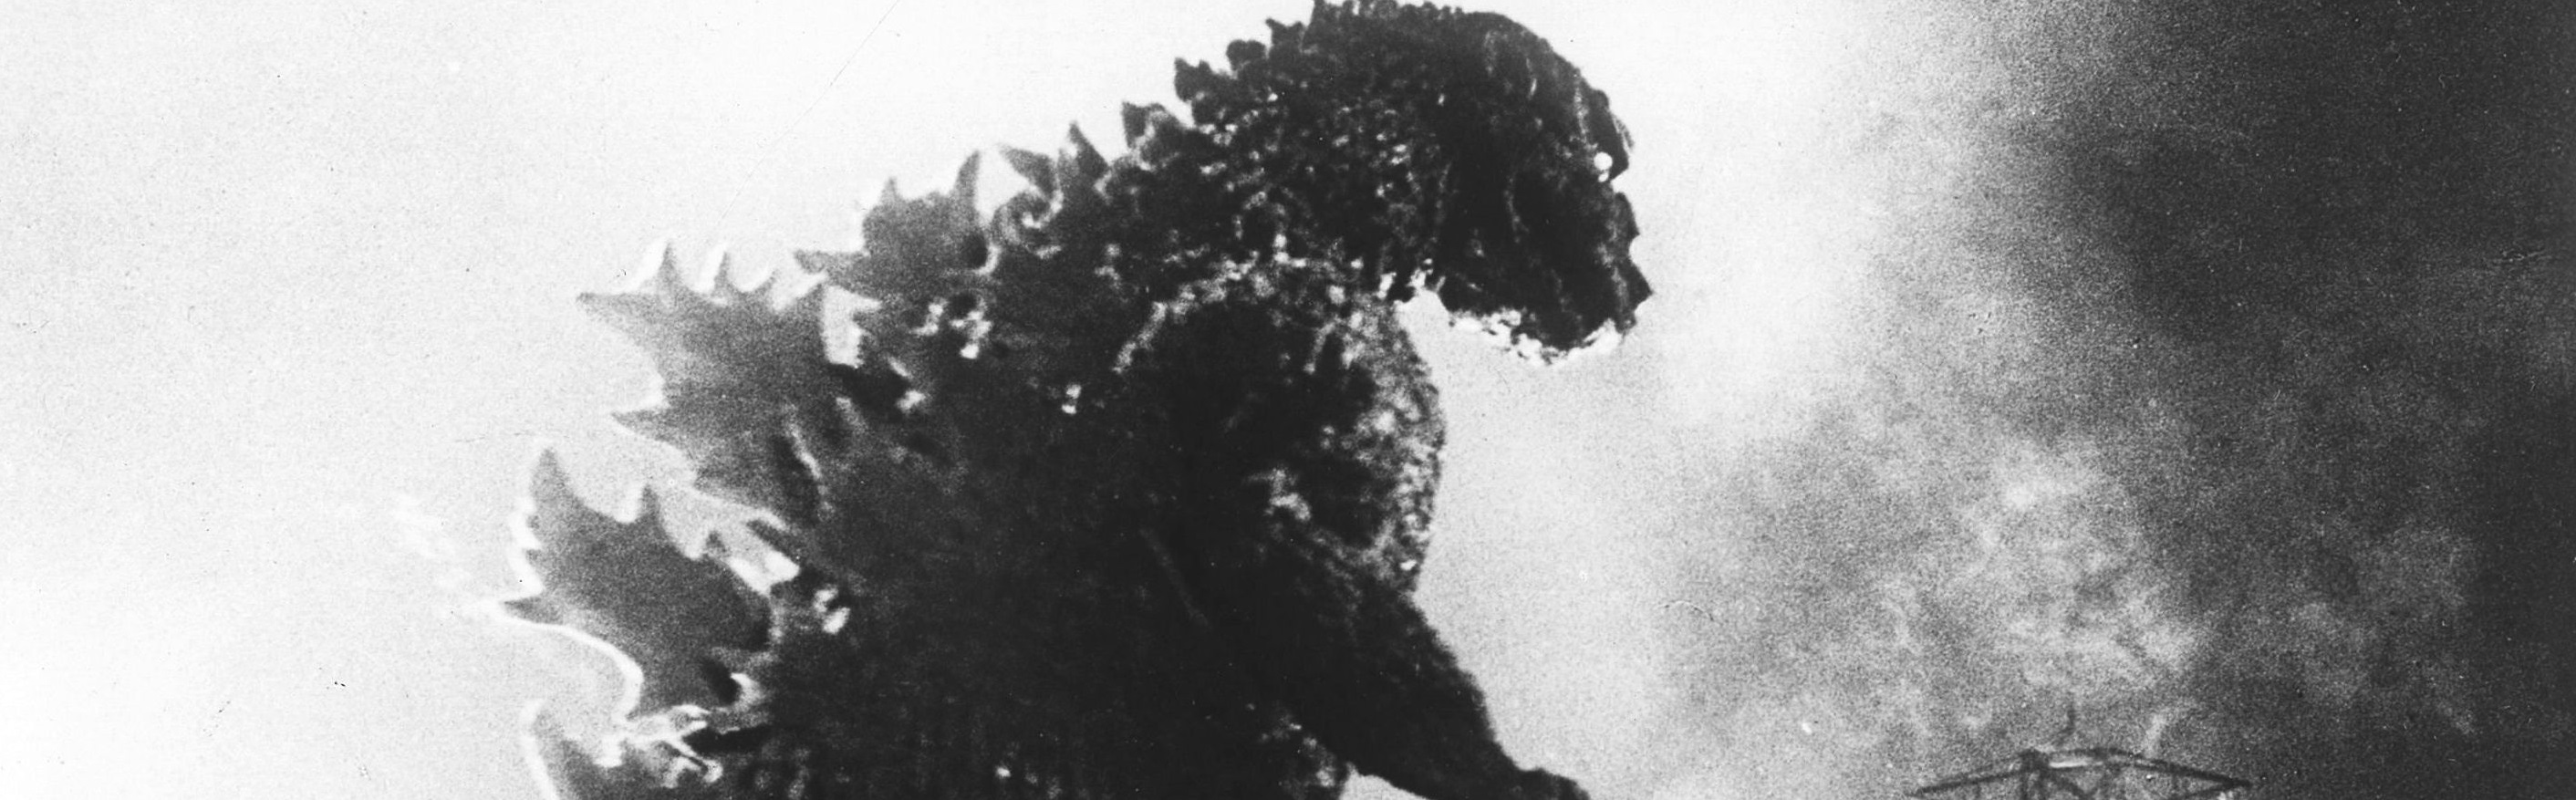 The king of monsters: a look into godzilla’s dark past